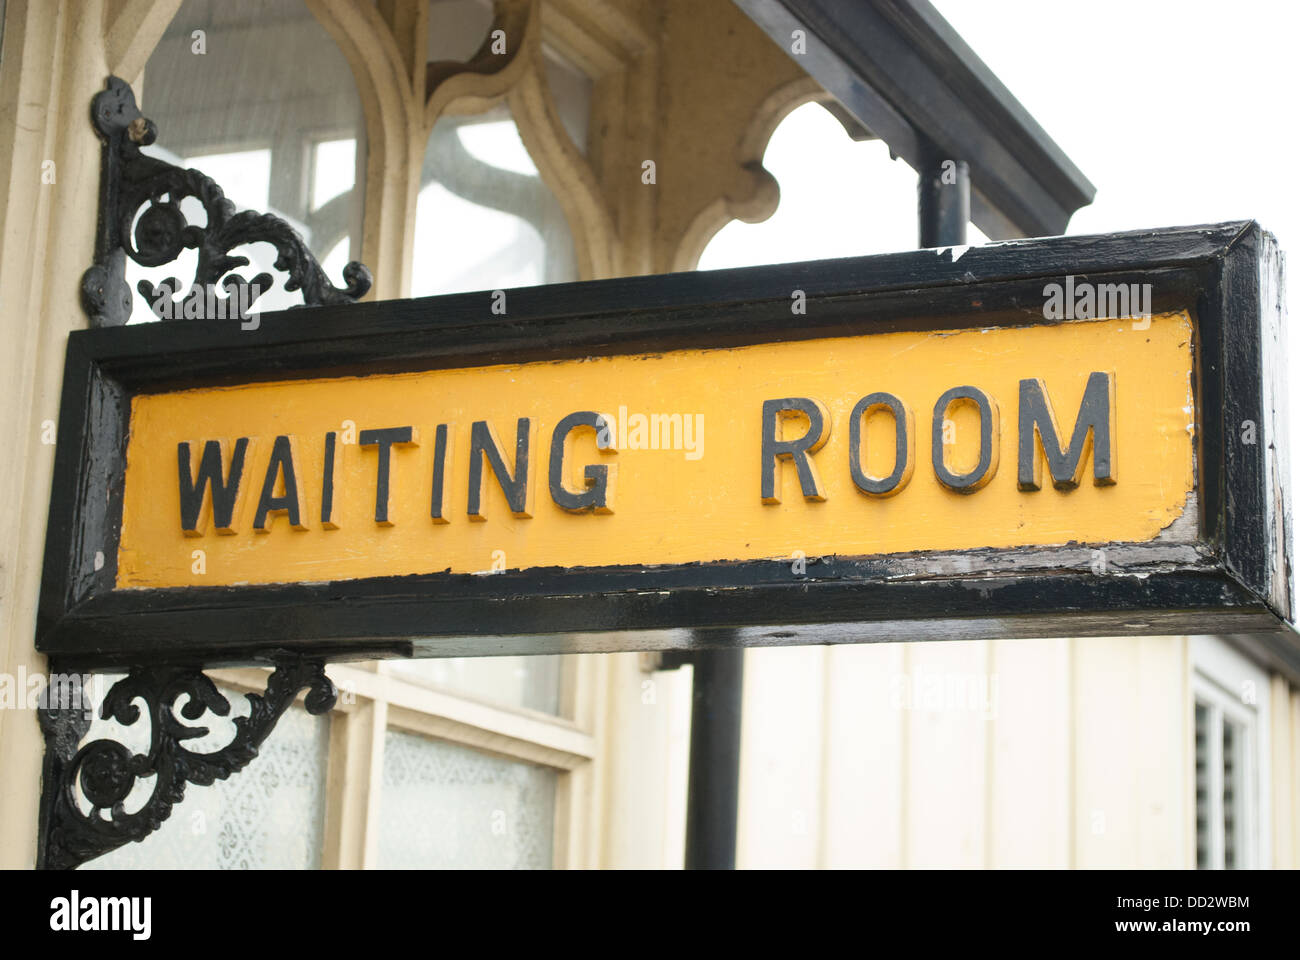 waiting room sign Stock Photo